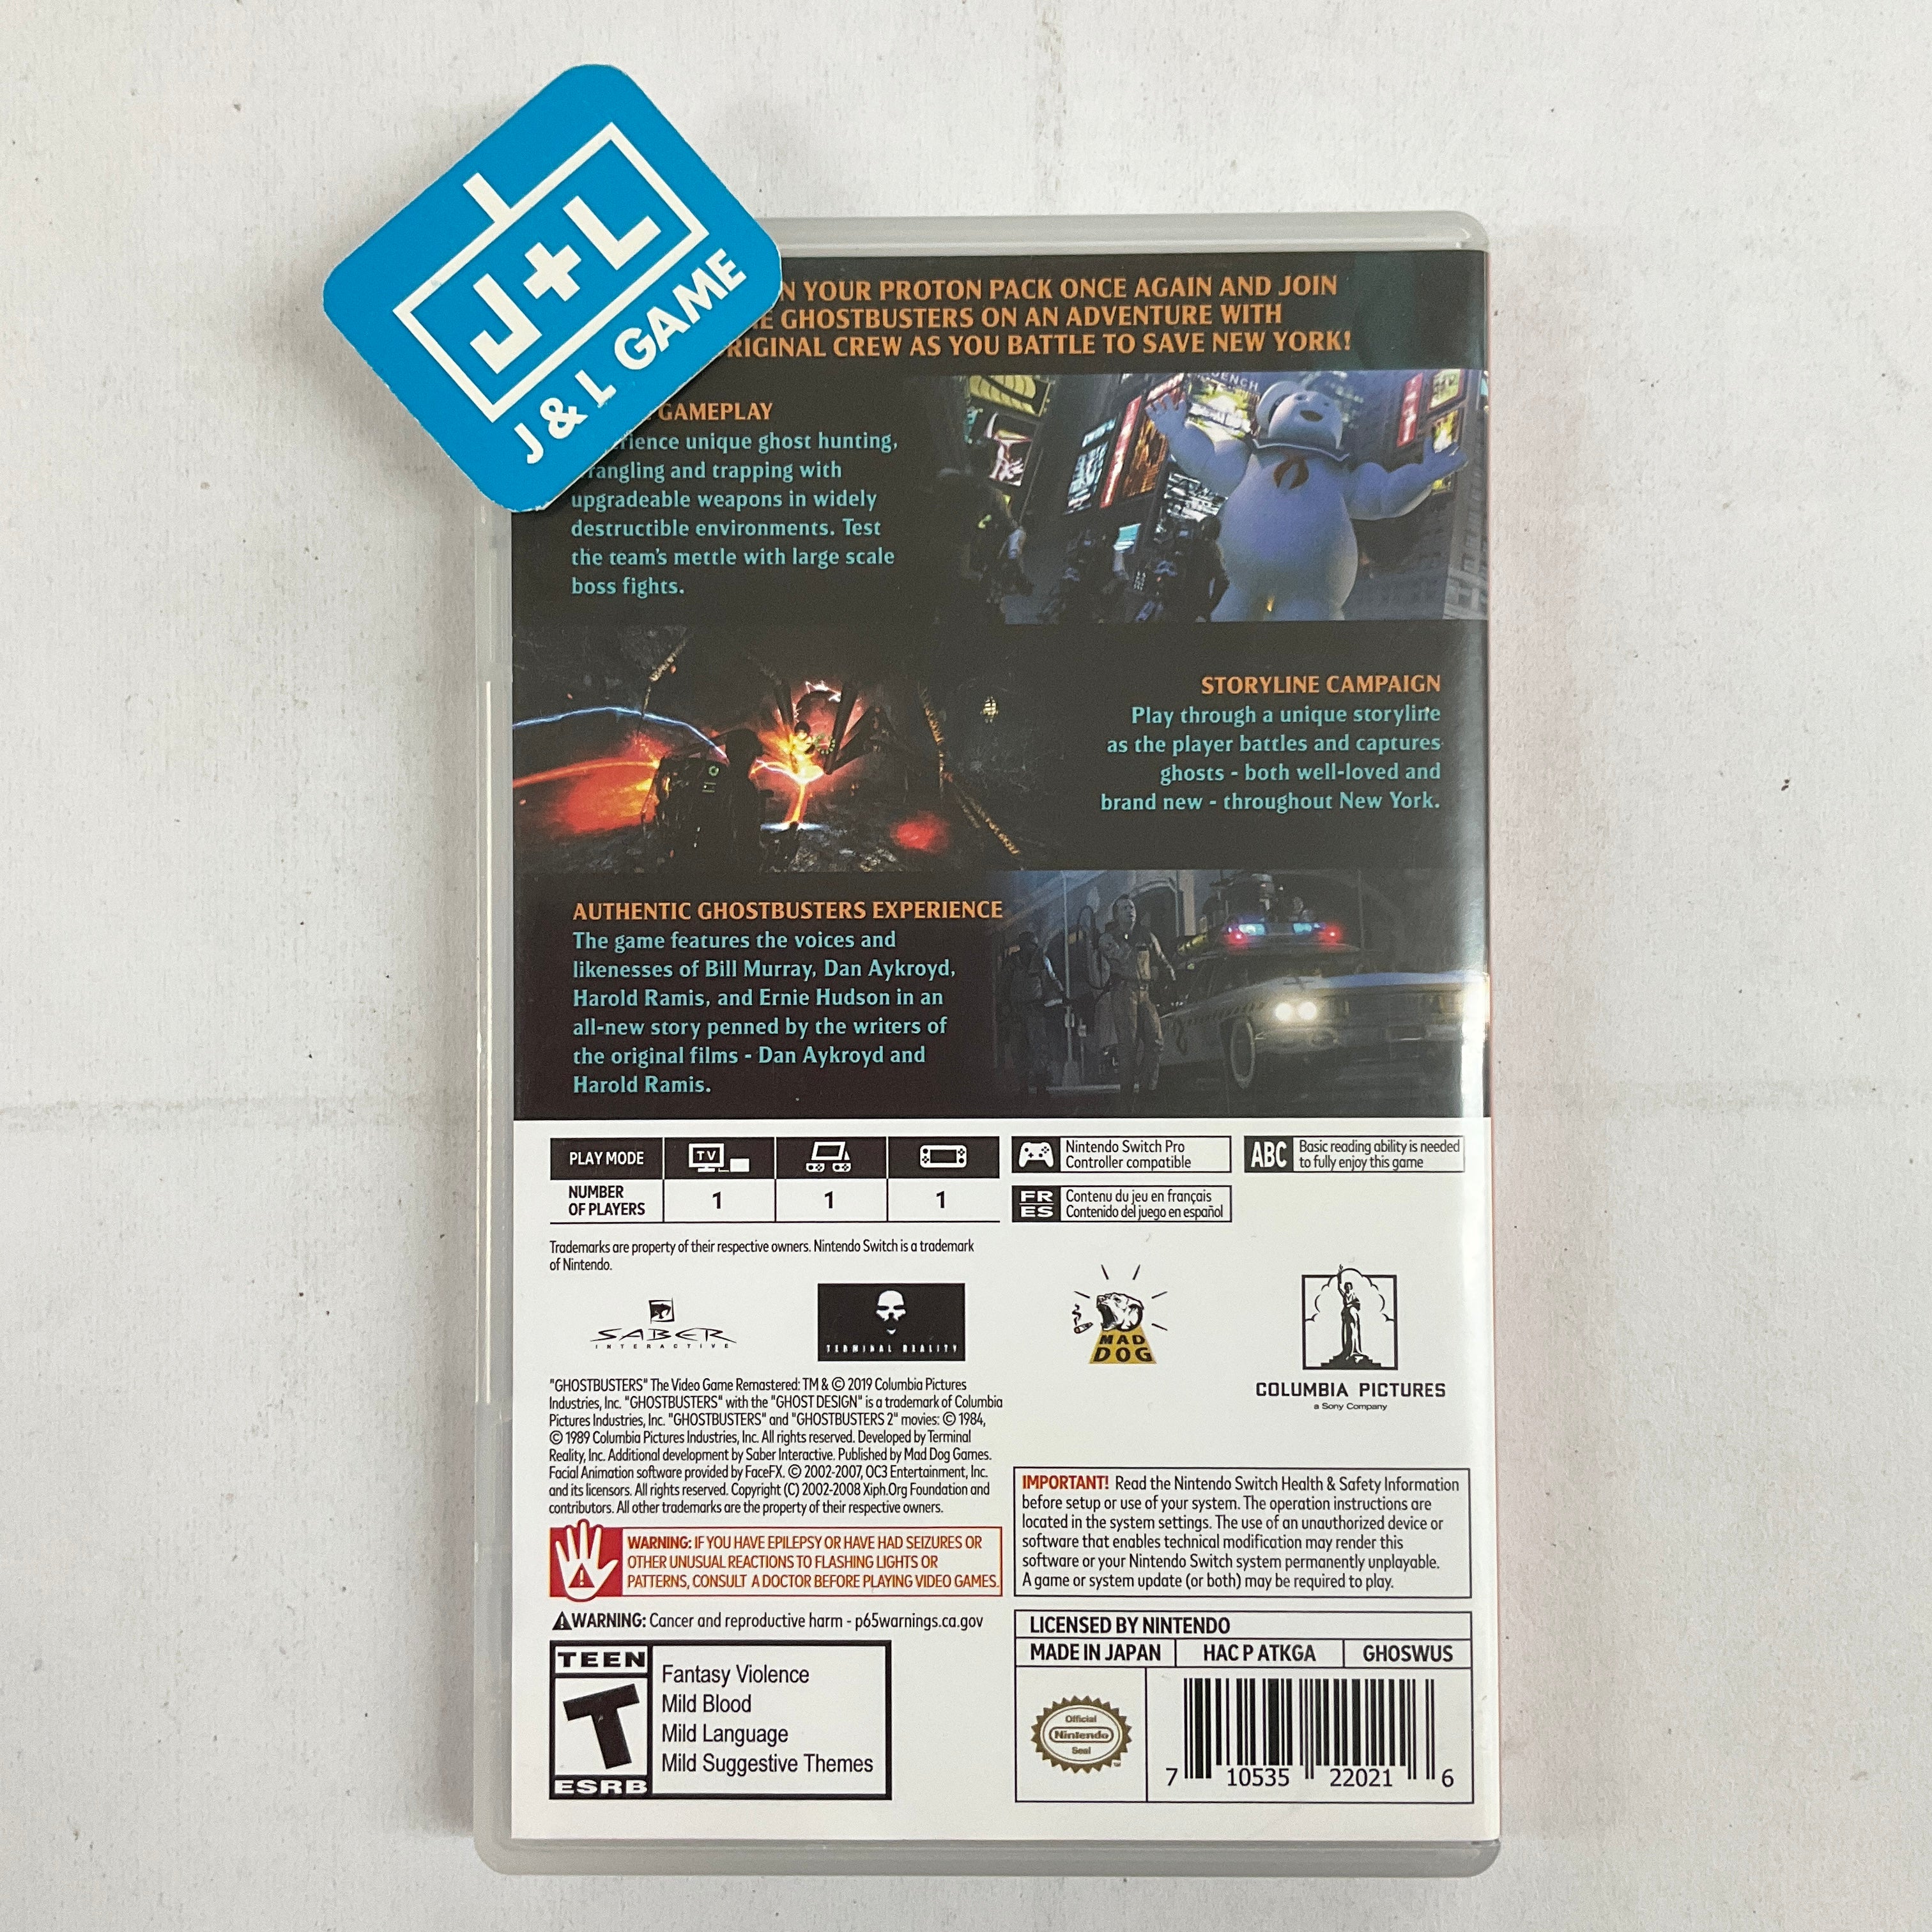 Ghostbusters: The Video Game Remastered - (NSW) Nintendo Switch [Pre-Owned] Video Games Mad Dog Games   